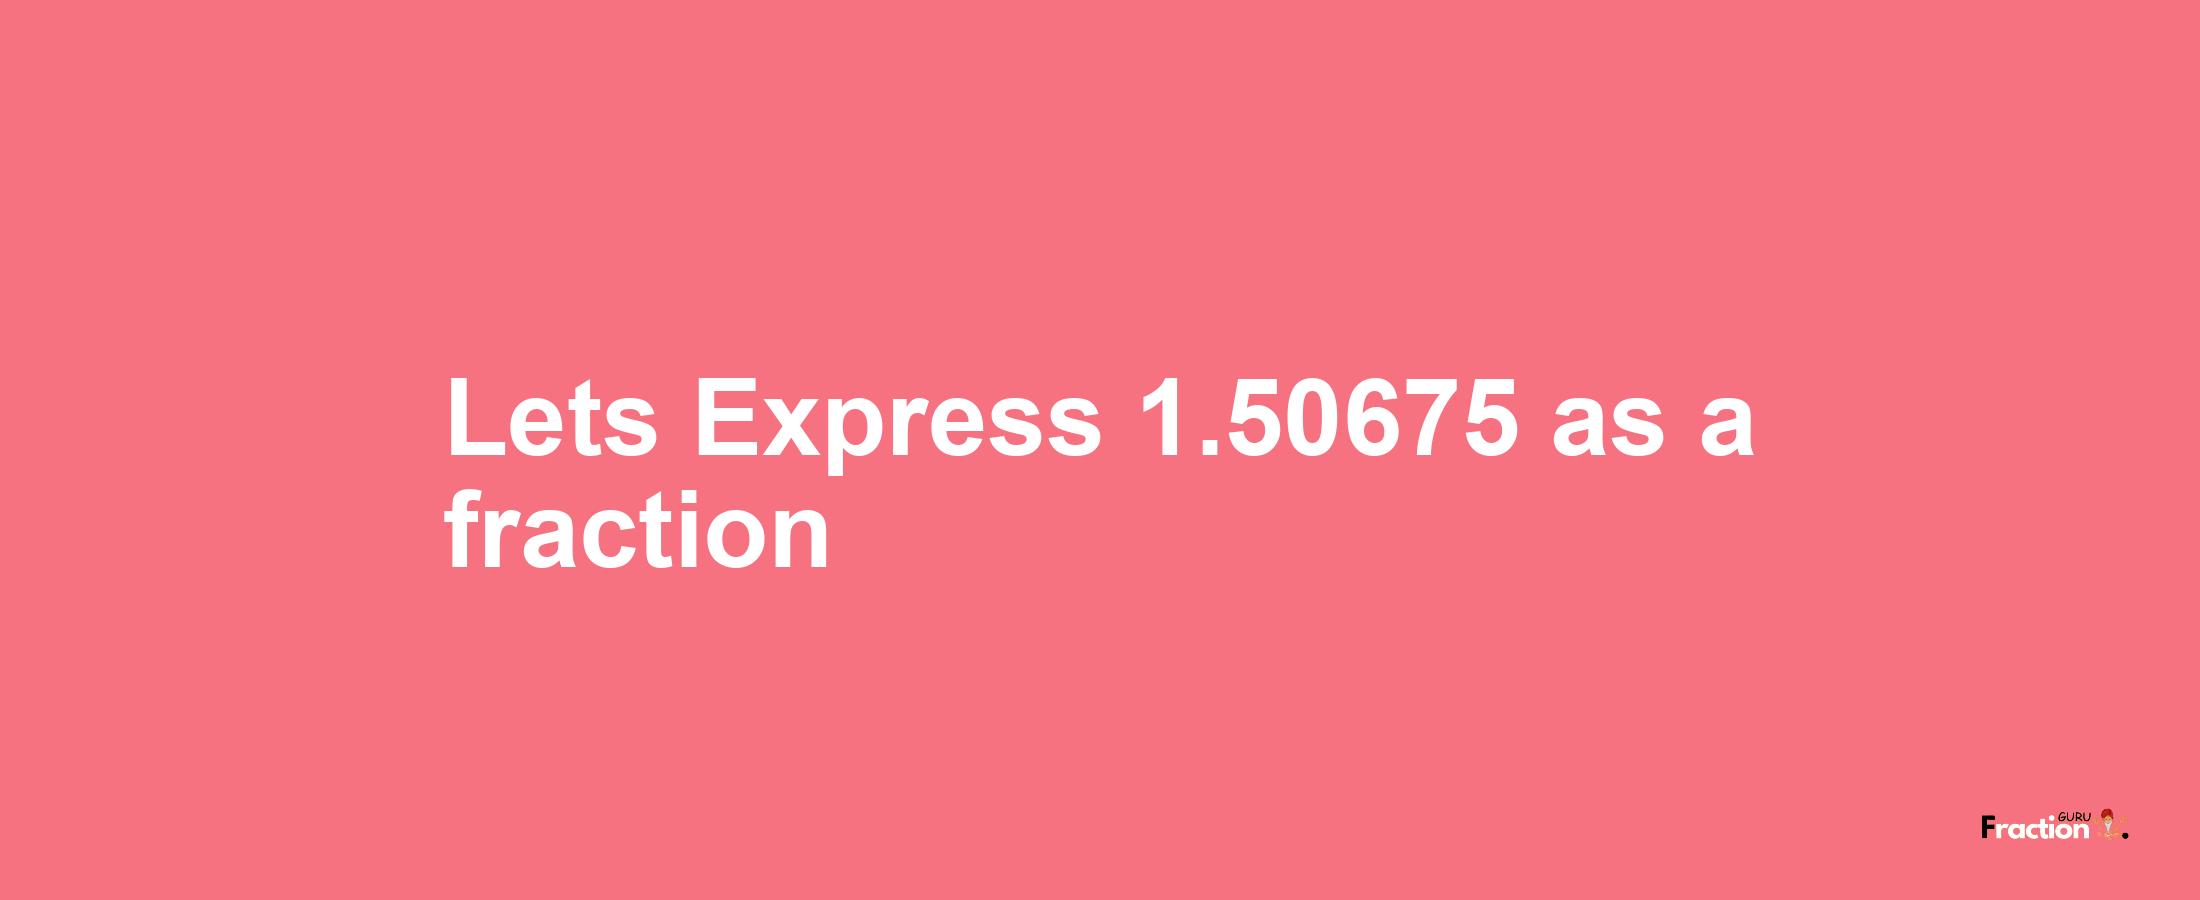 Lets Express 1.50675 as afraction